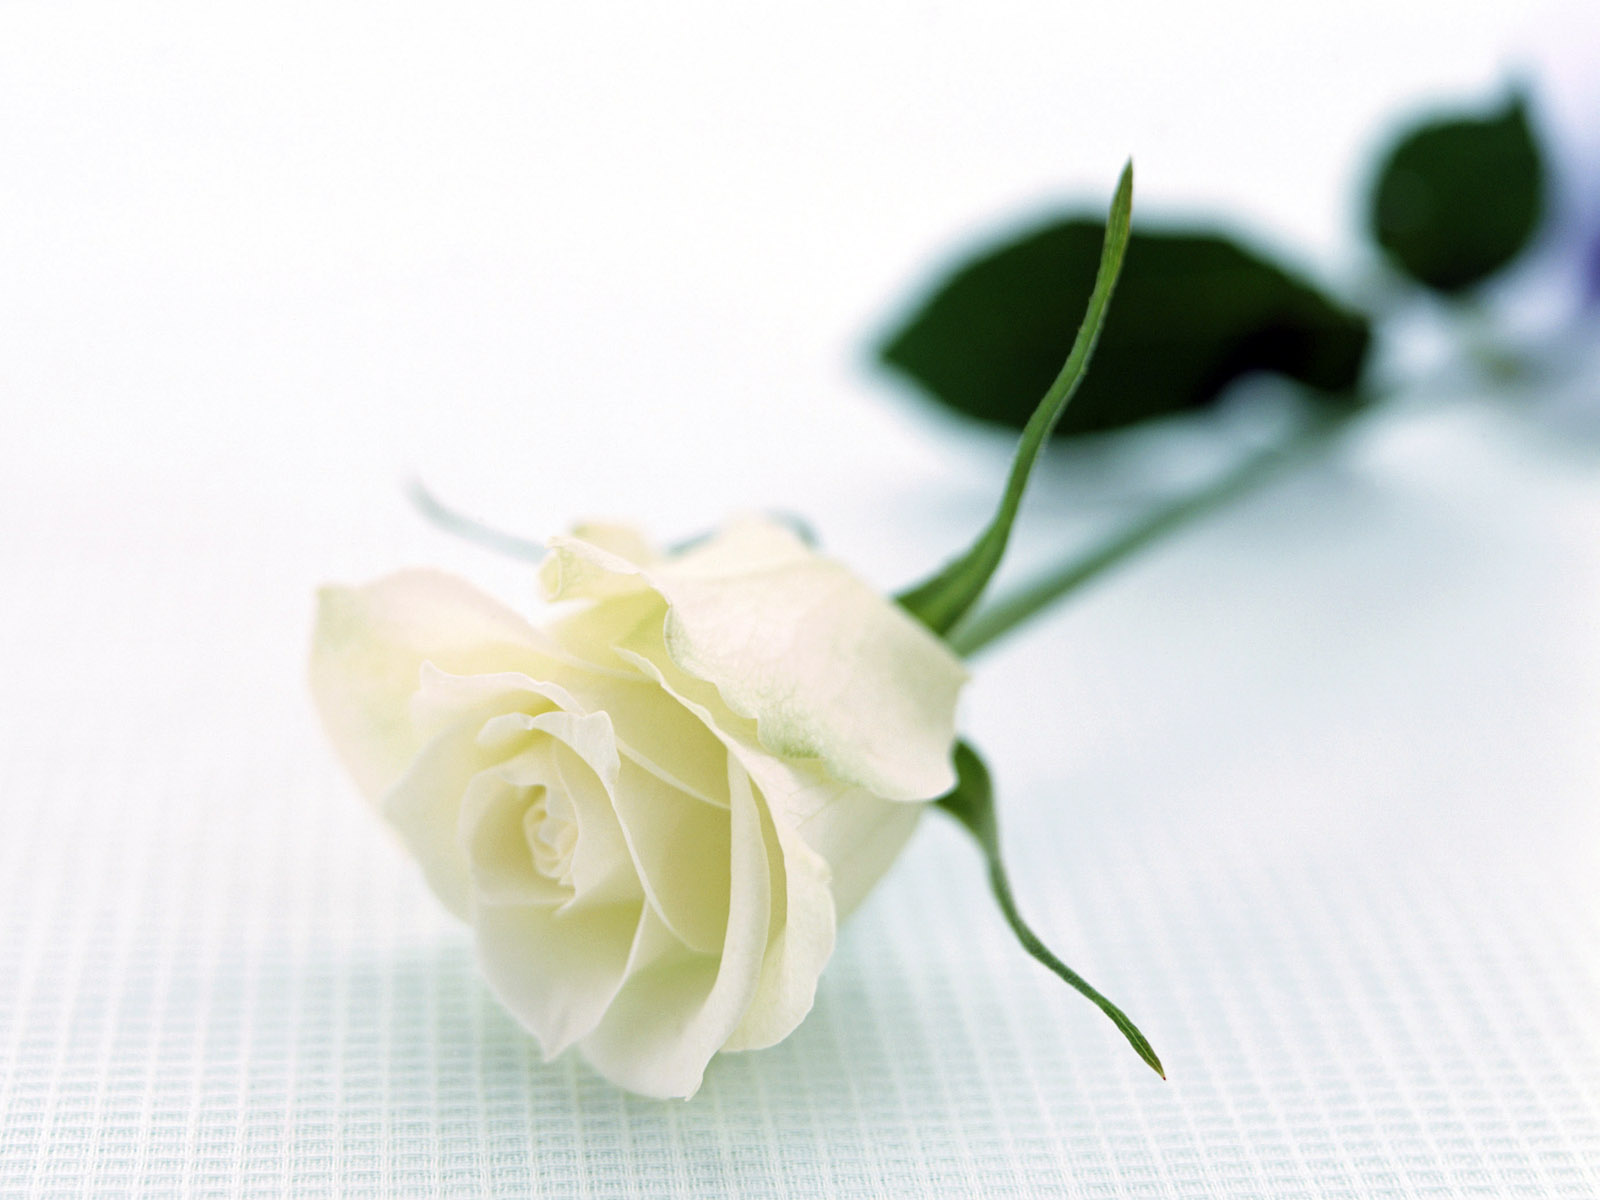  Flowers Pictures Beautiful Flowers Wallpapers White Roses